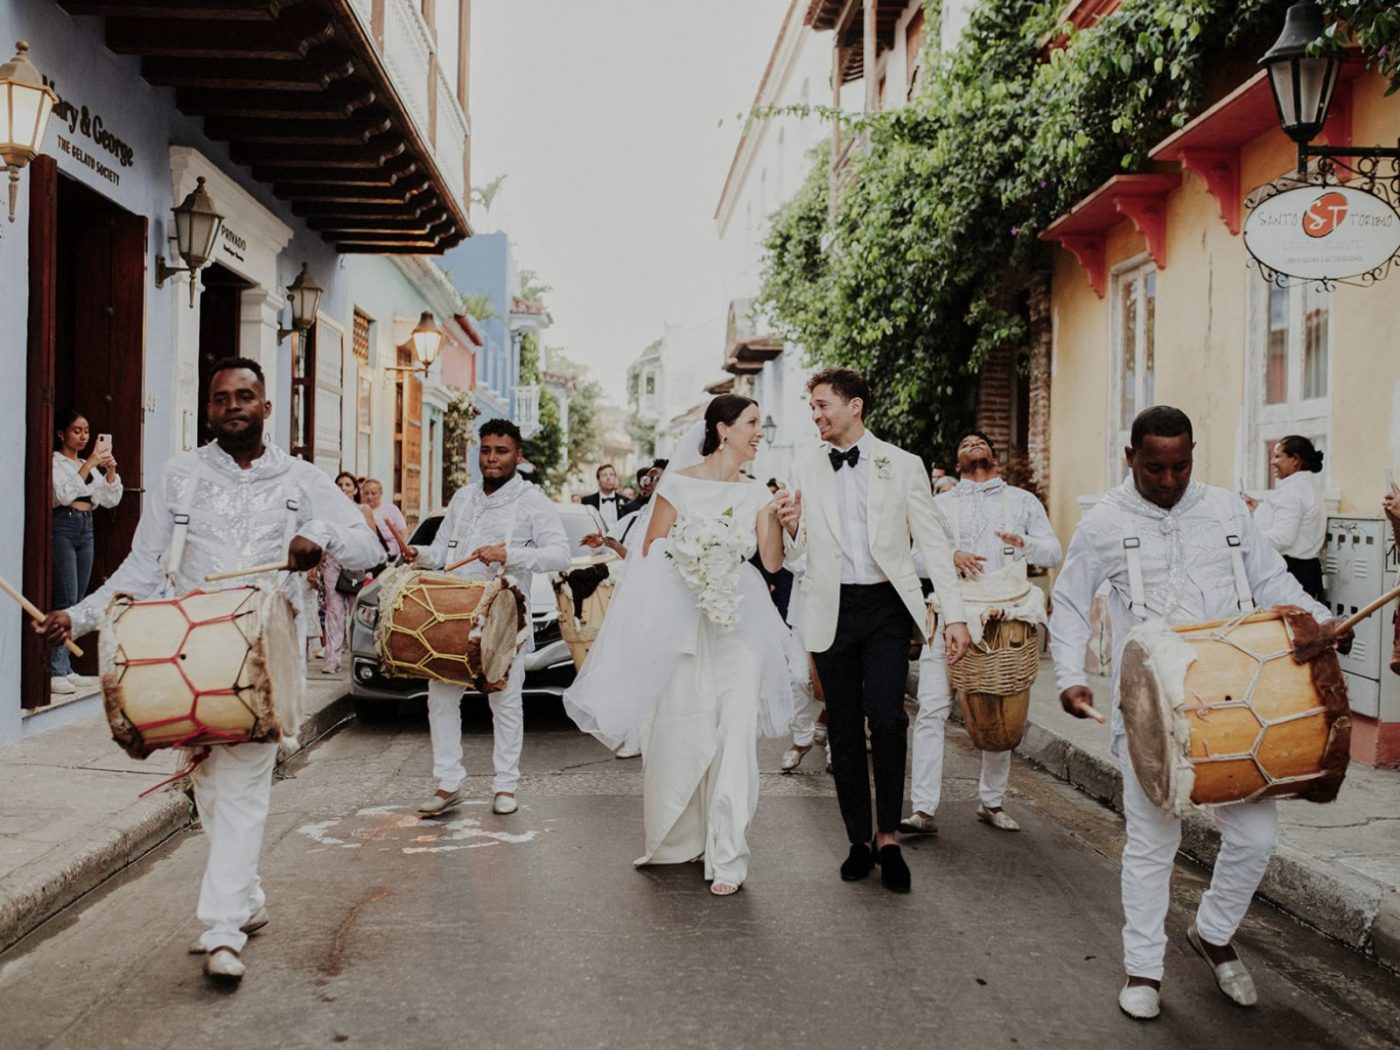 Getting Married in Cartagena, Colombia